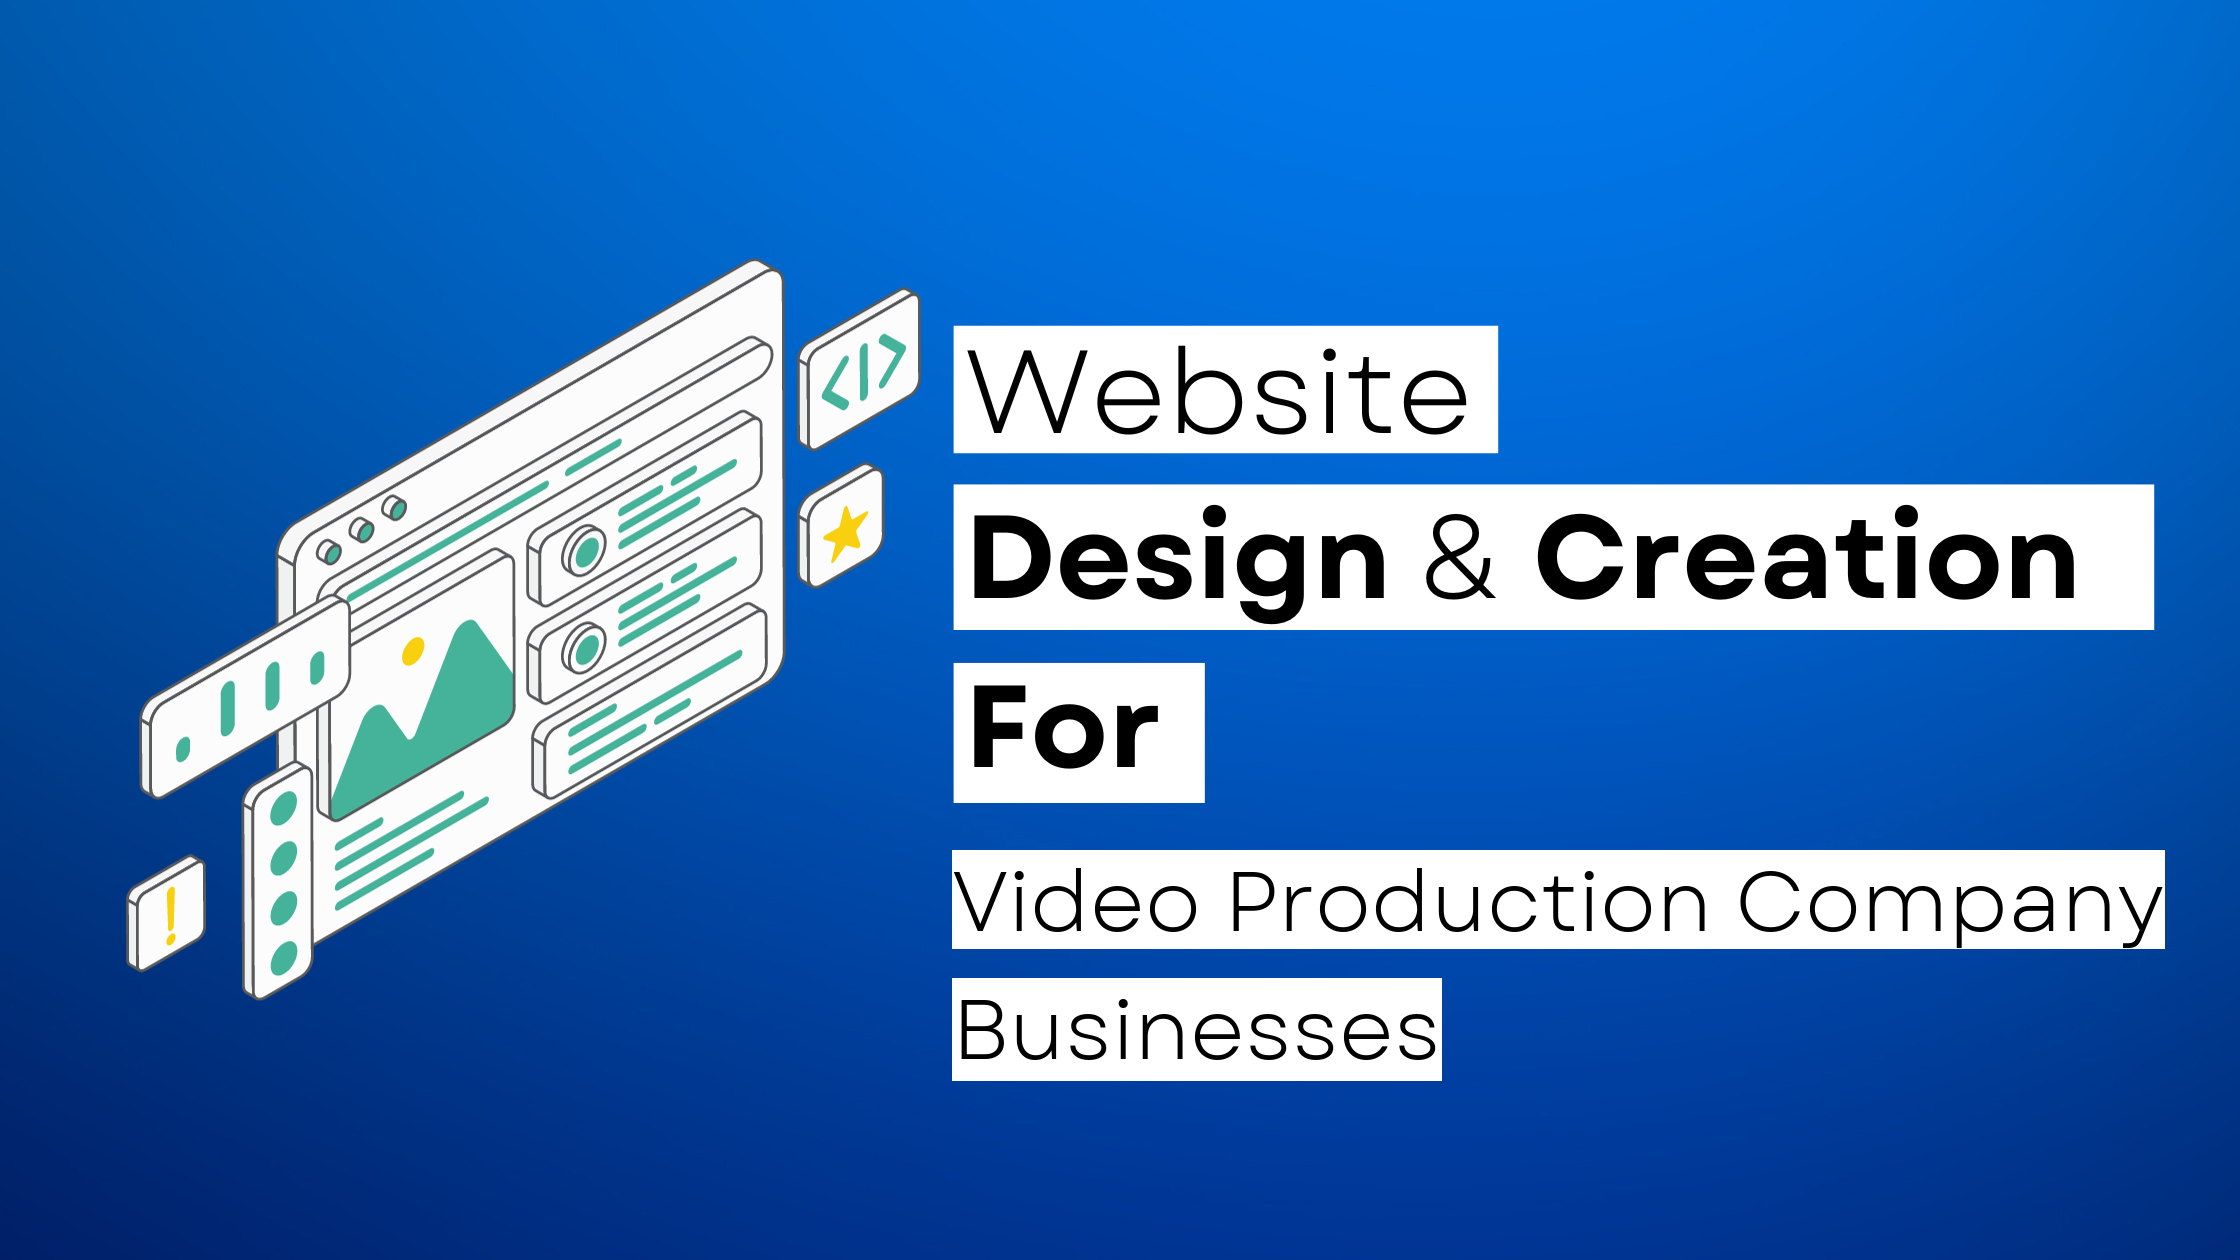 How to start a Video Production Company website